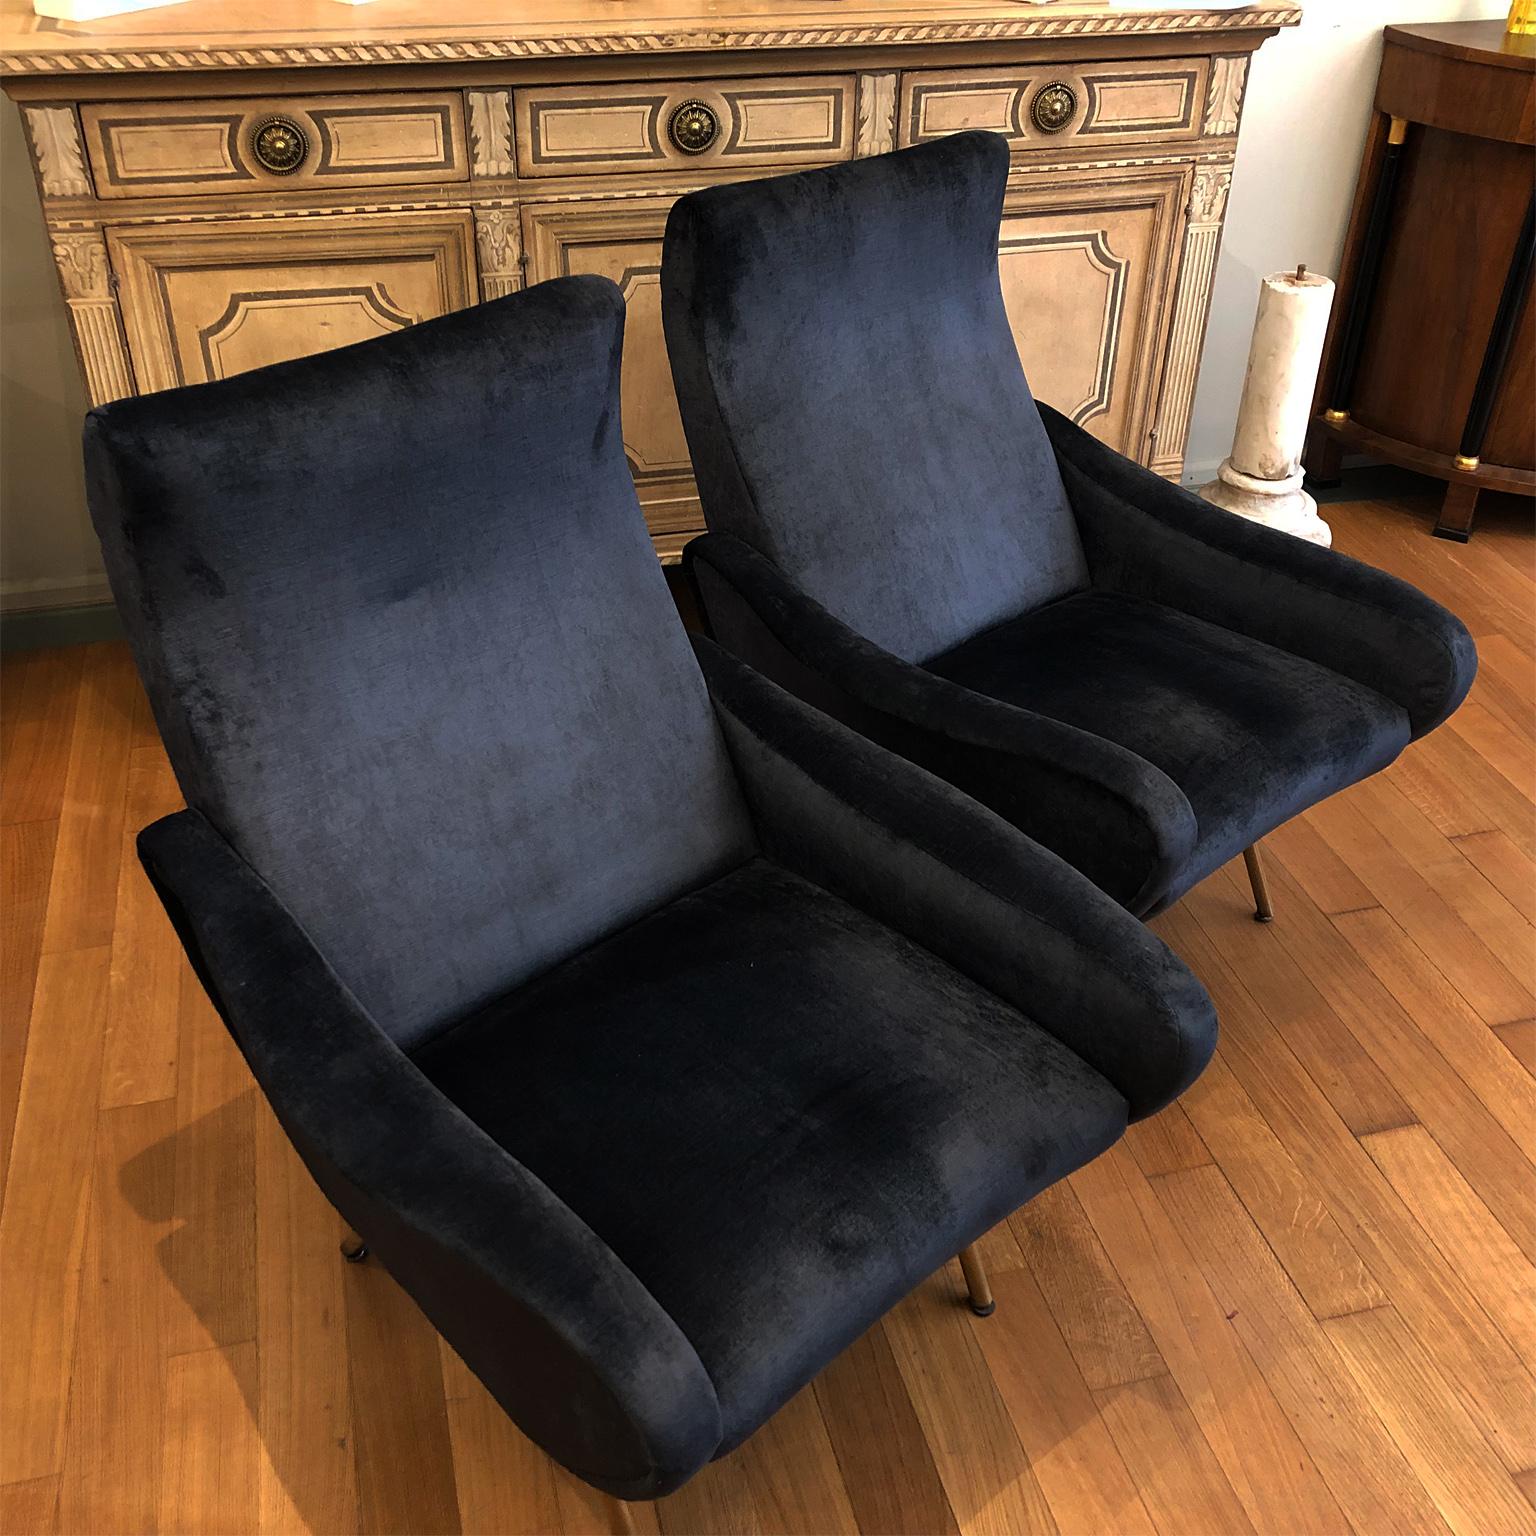 Armchair in the style of the model by Marco Zanuso, Ledy. Wooden frame and wooden conical leg finished with bass pickup, covered with polyurethane foam. Coating in original wool in good condition of gray-blue velvet.